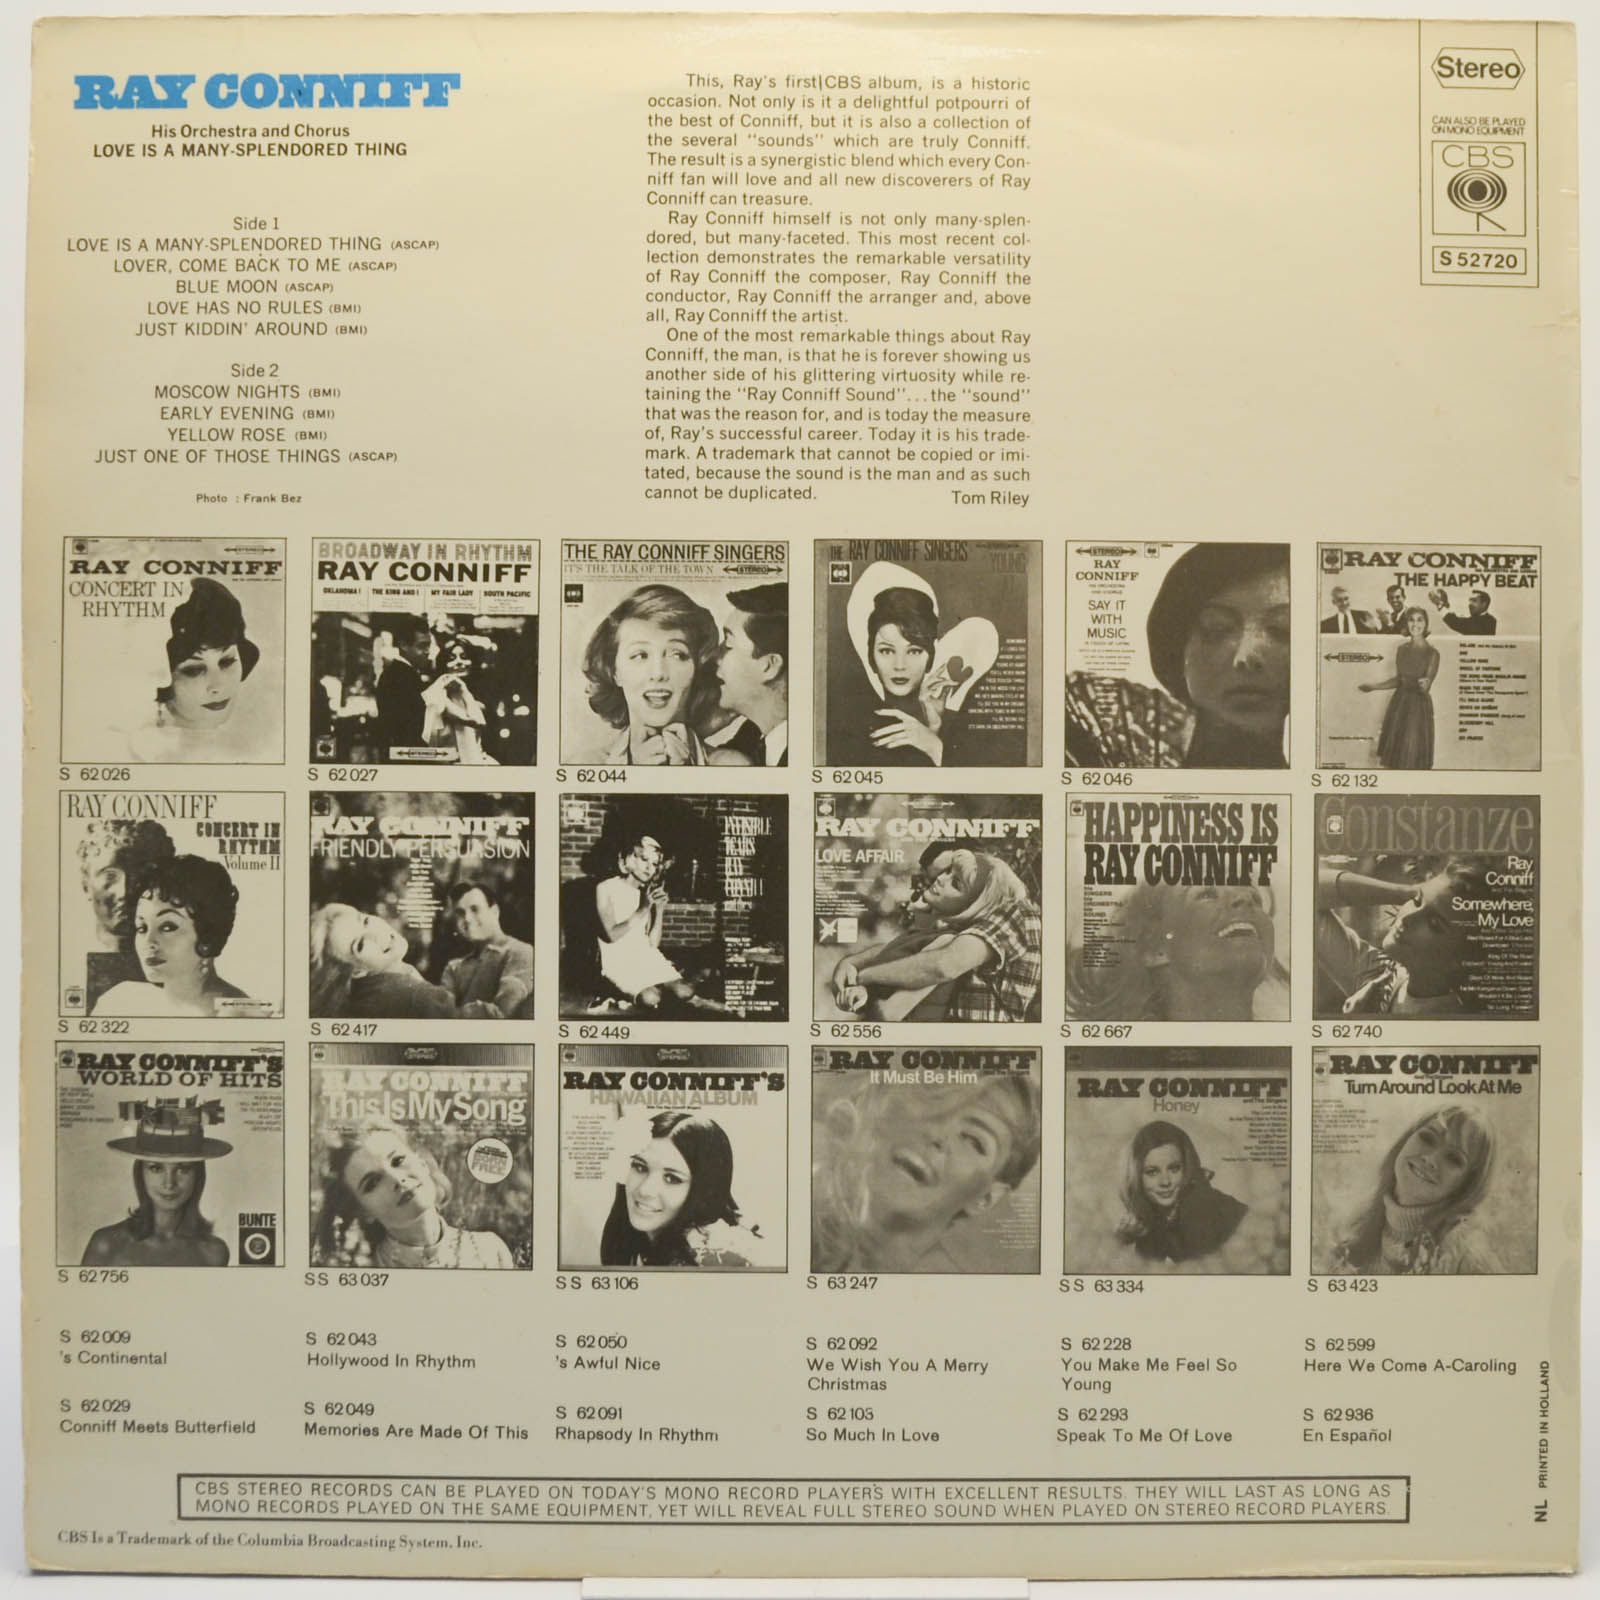 Ray Conniff His Orchestra And Chorus — Love Is A Many-Splendored Thing, 1969